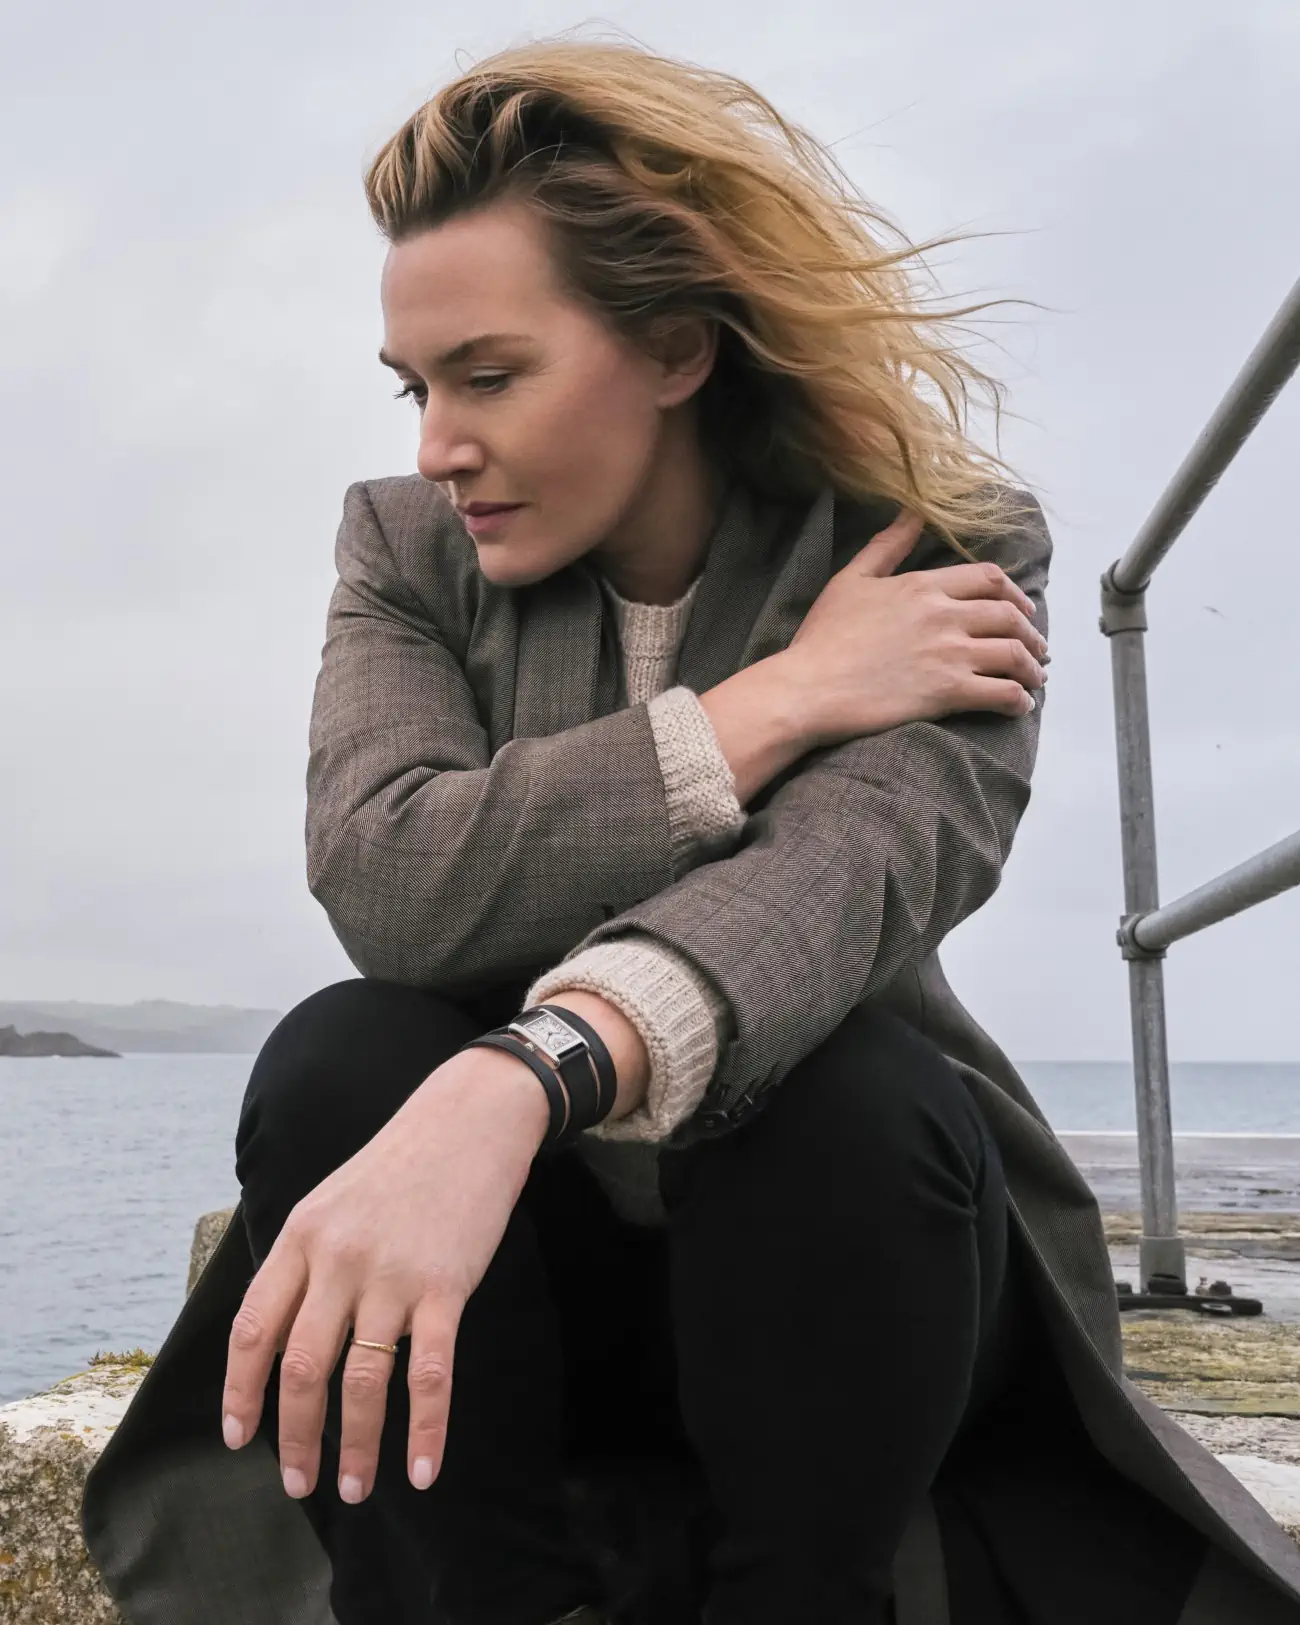 Kate Winslet channels timeless elegance in the new Longines Mini DolceVita campaign